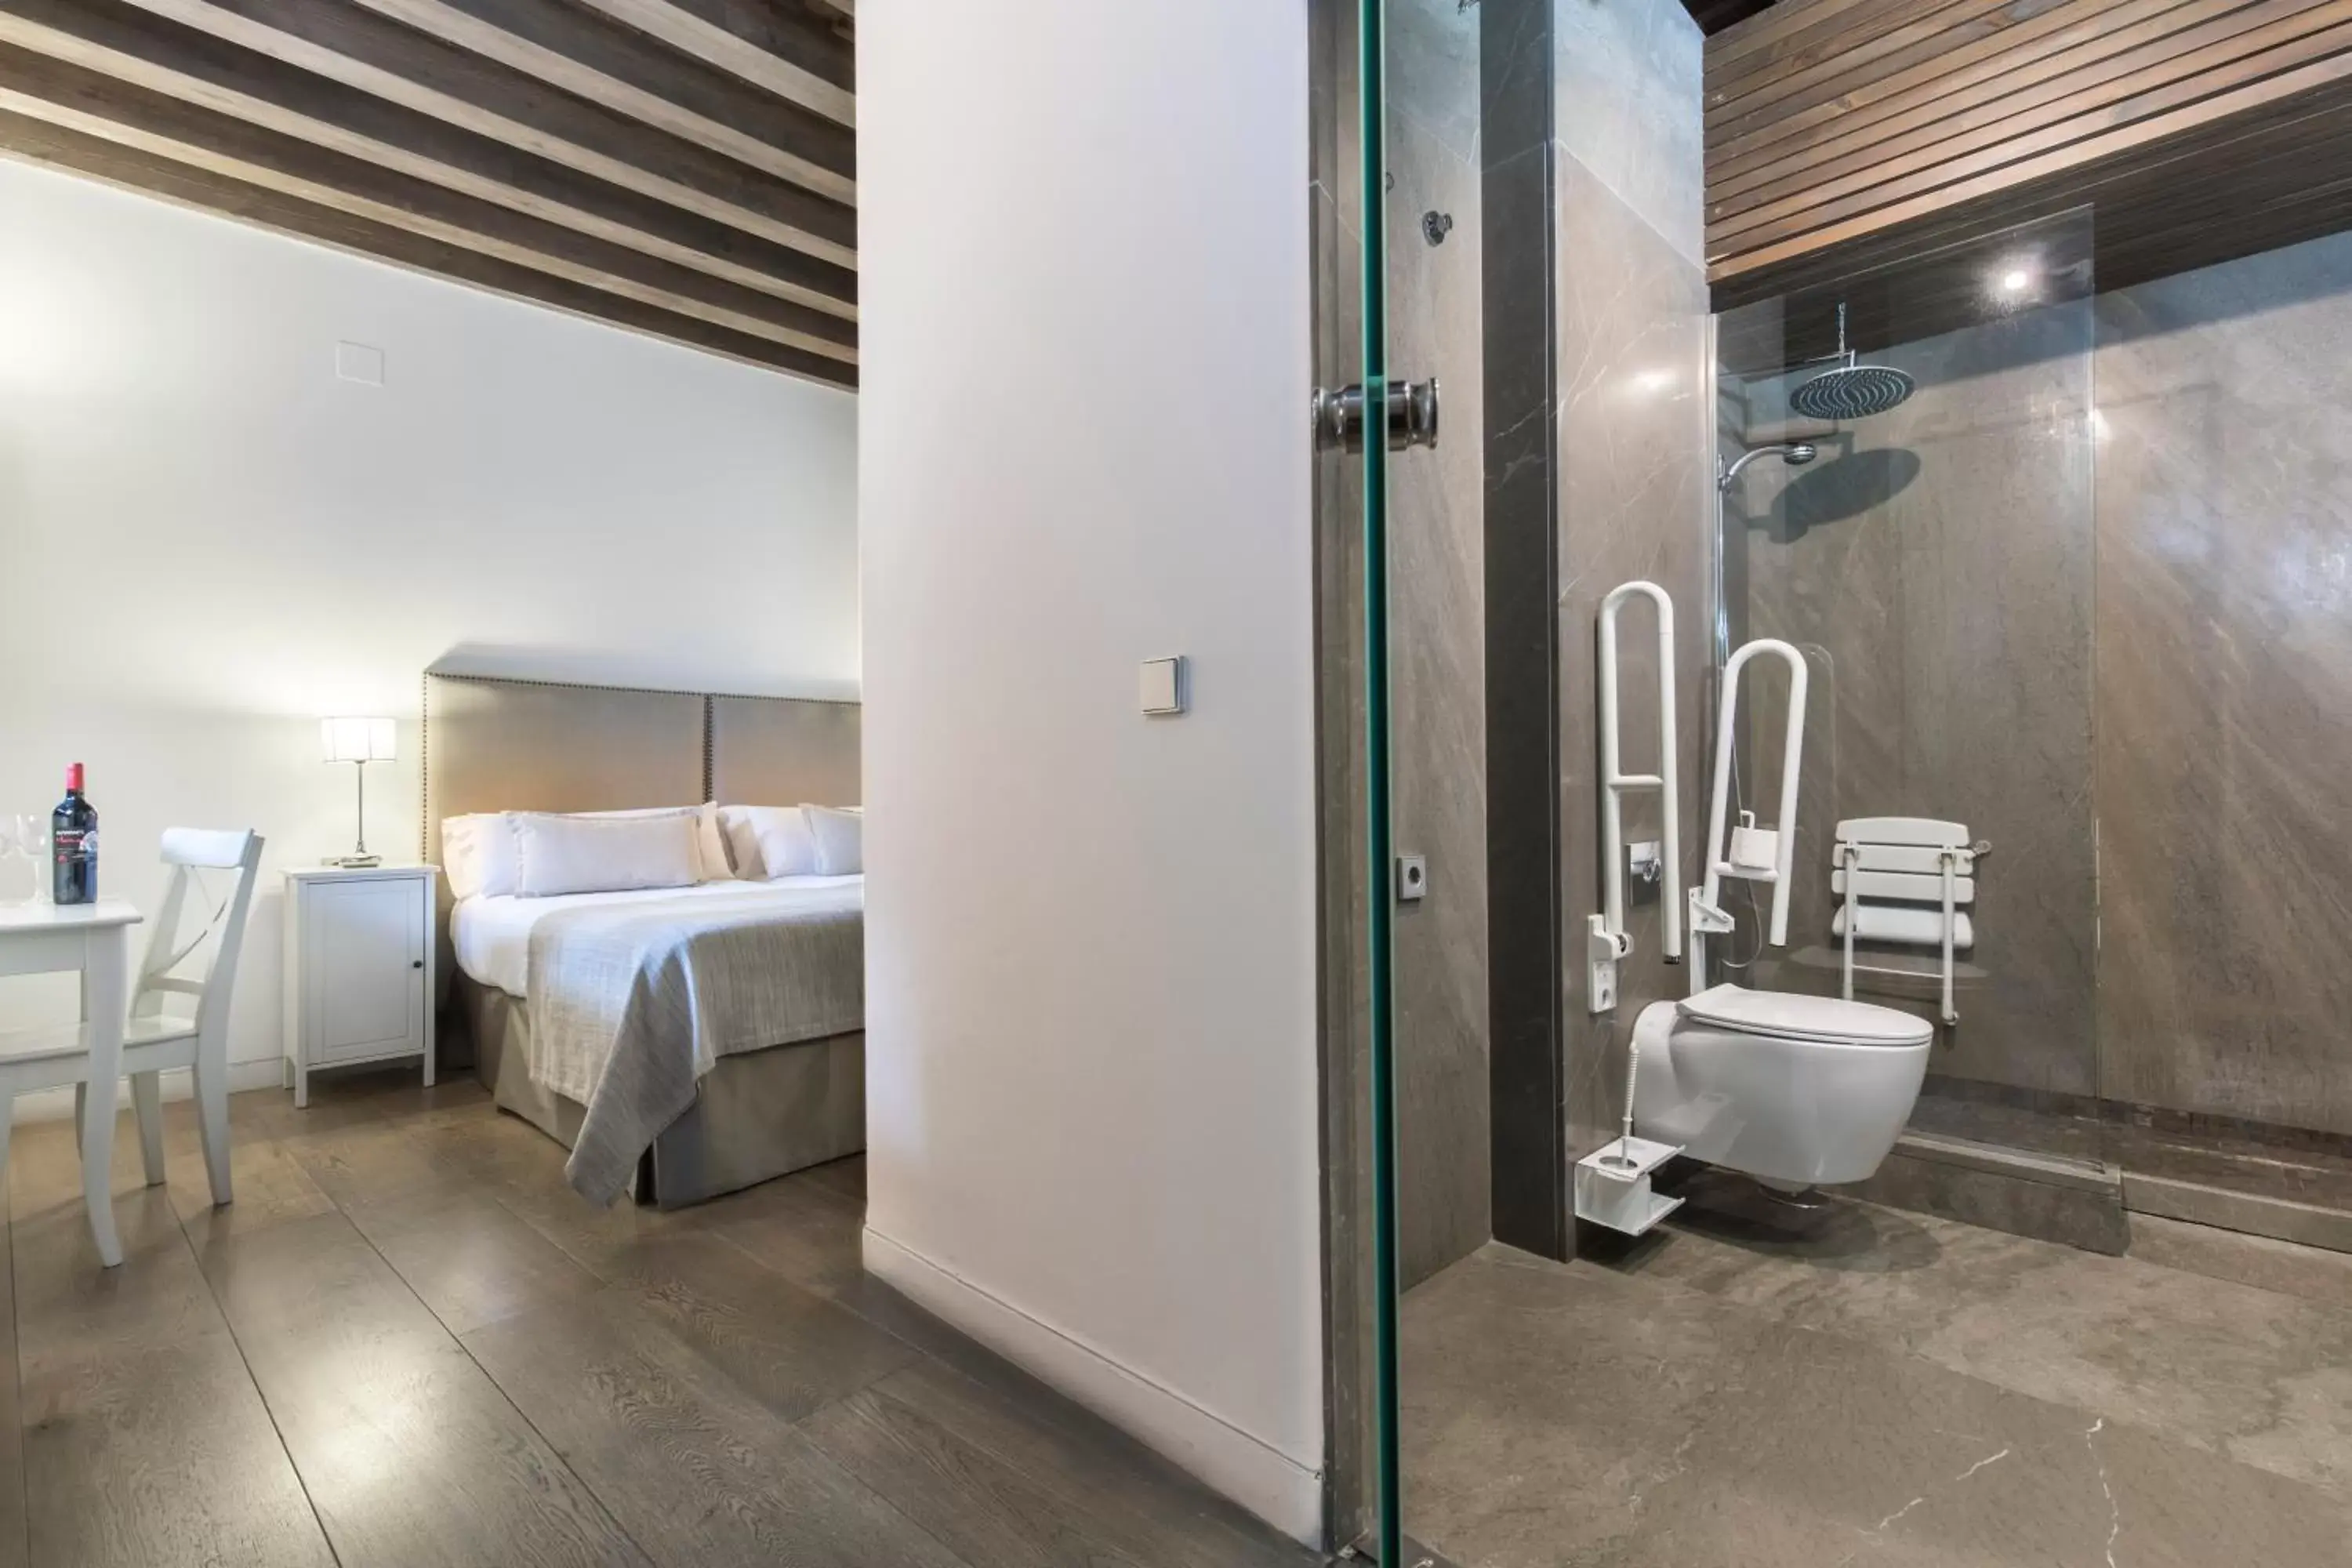 Facility for disabled guests, Bathroom in Shine Albayzín